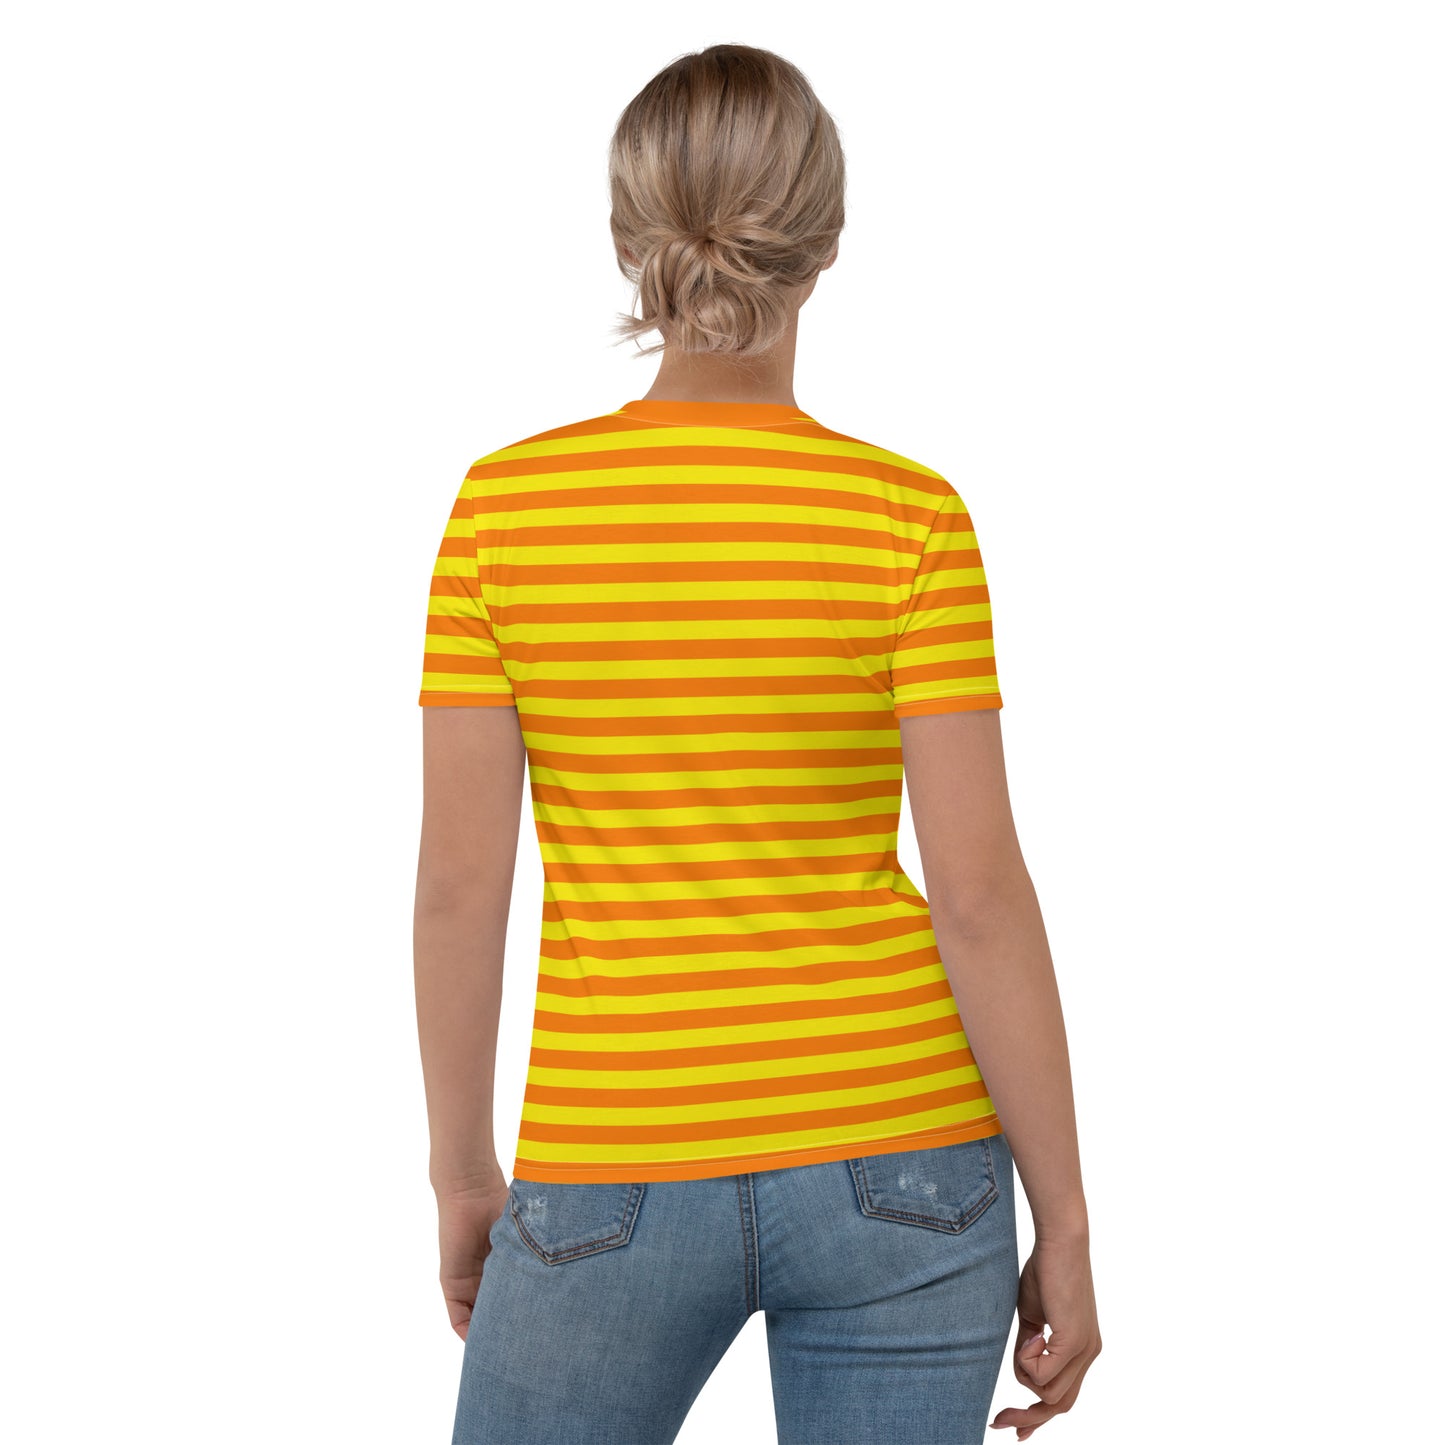 Summer t-shirt with orange and yellow stripes